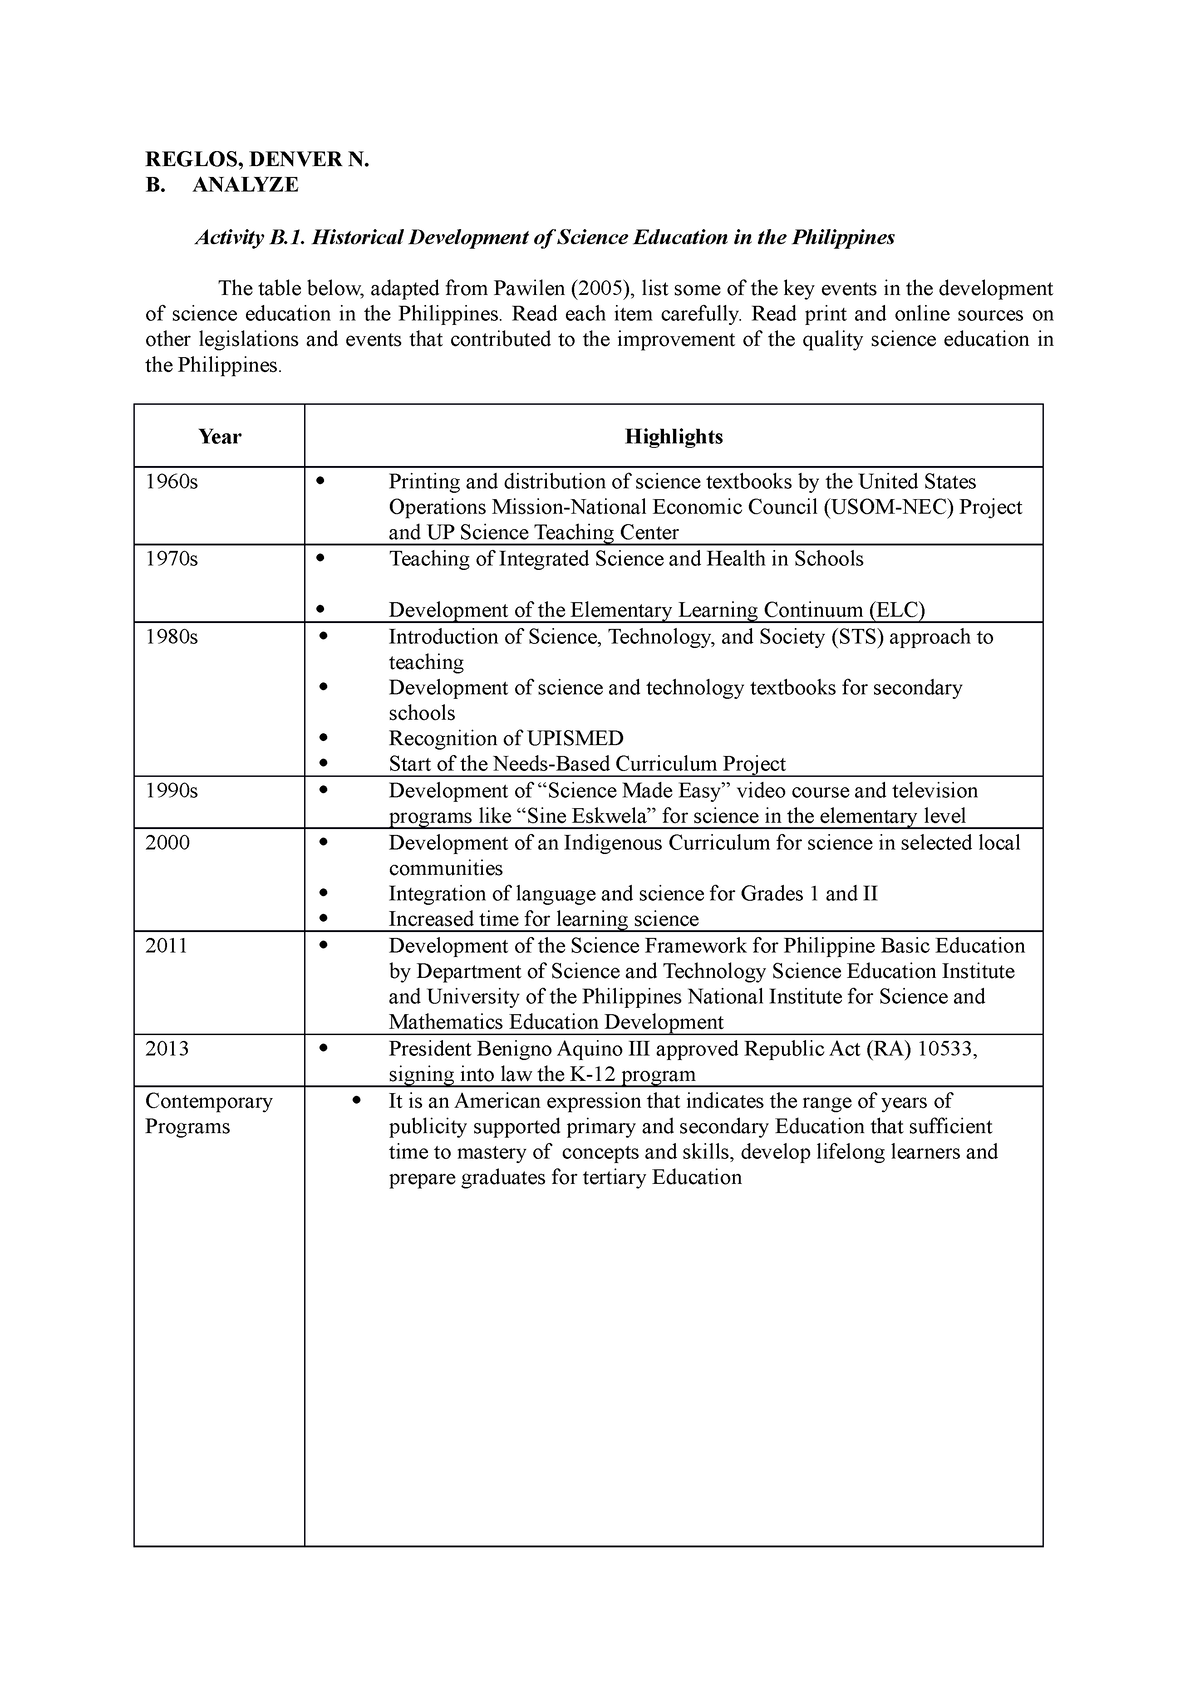 list of thesis titles in science education in the philippines